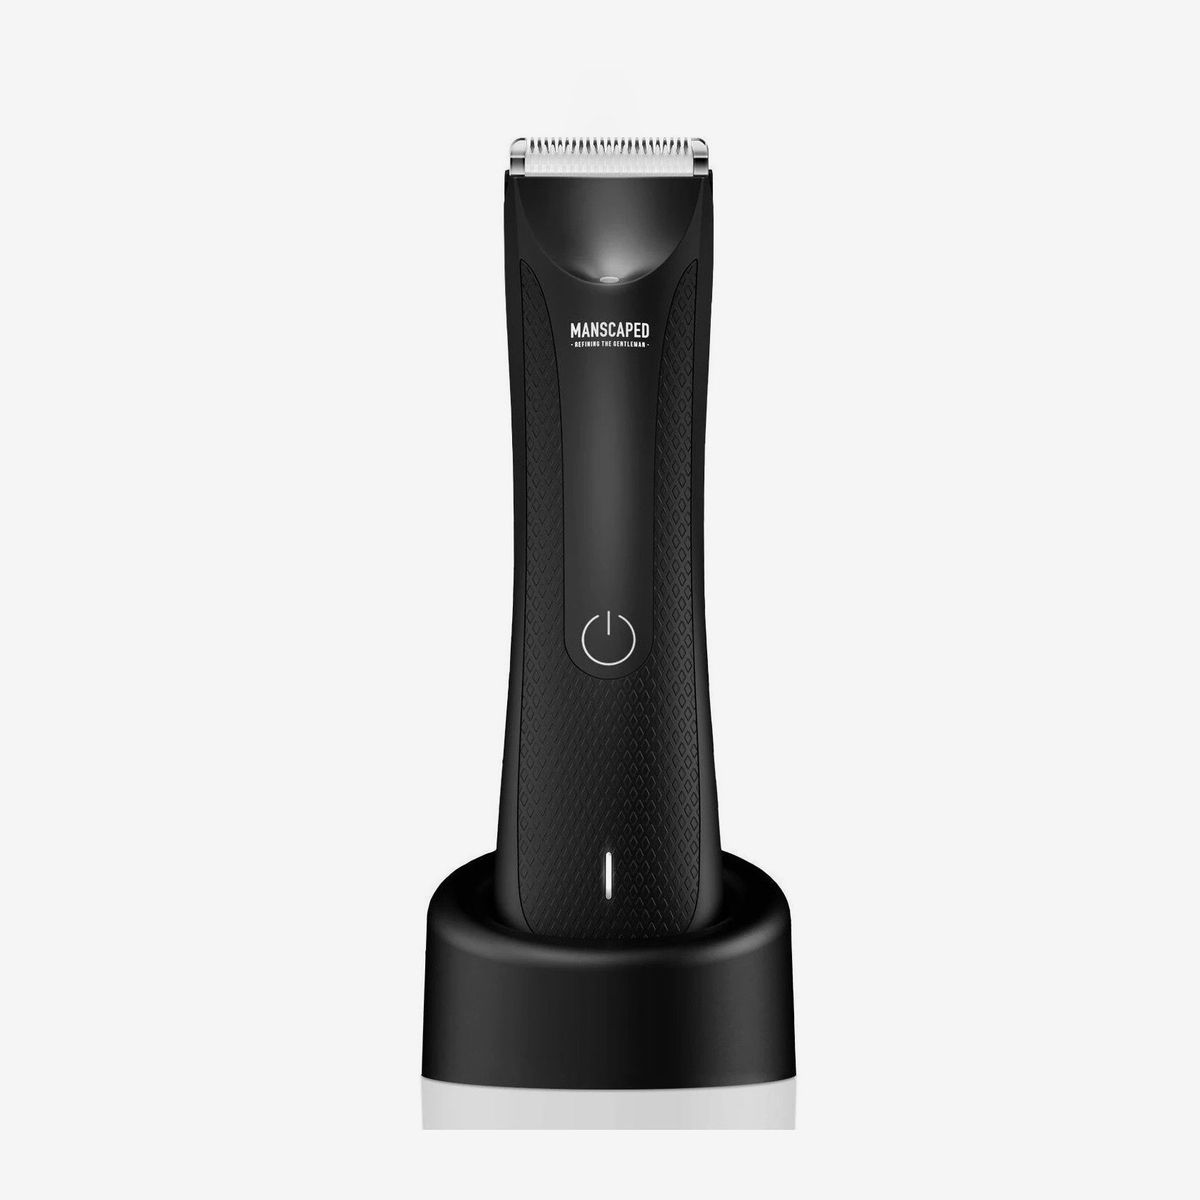 oneblade for manscaping